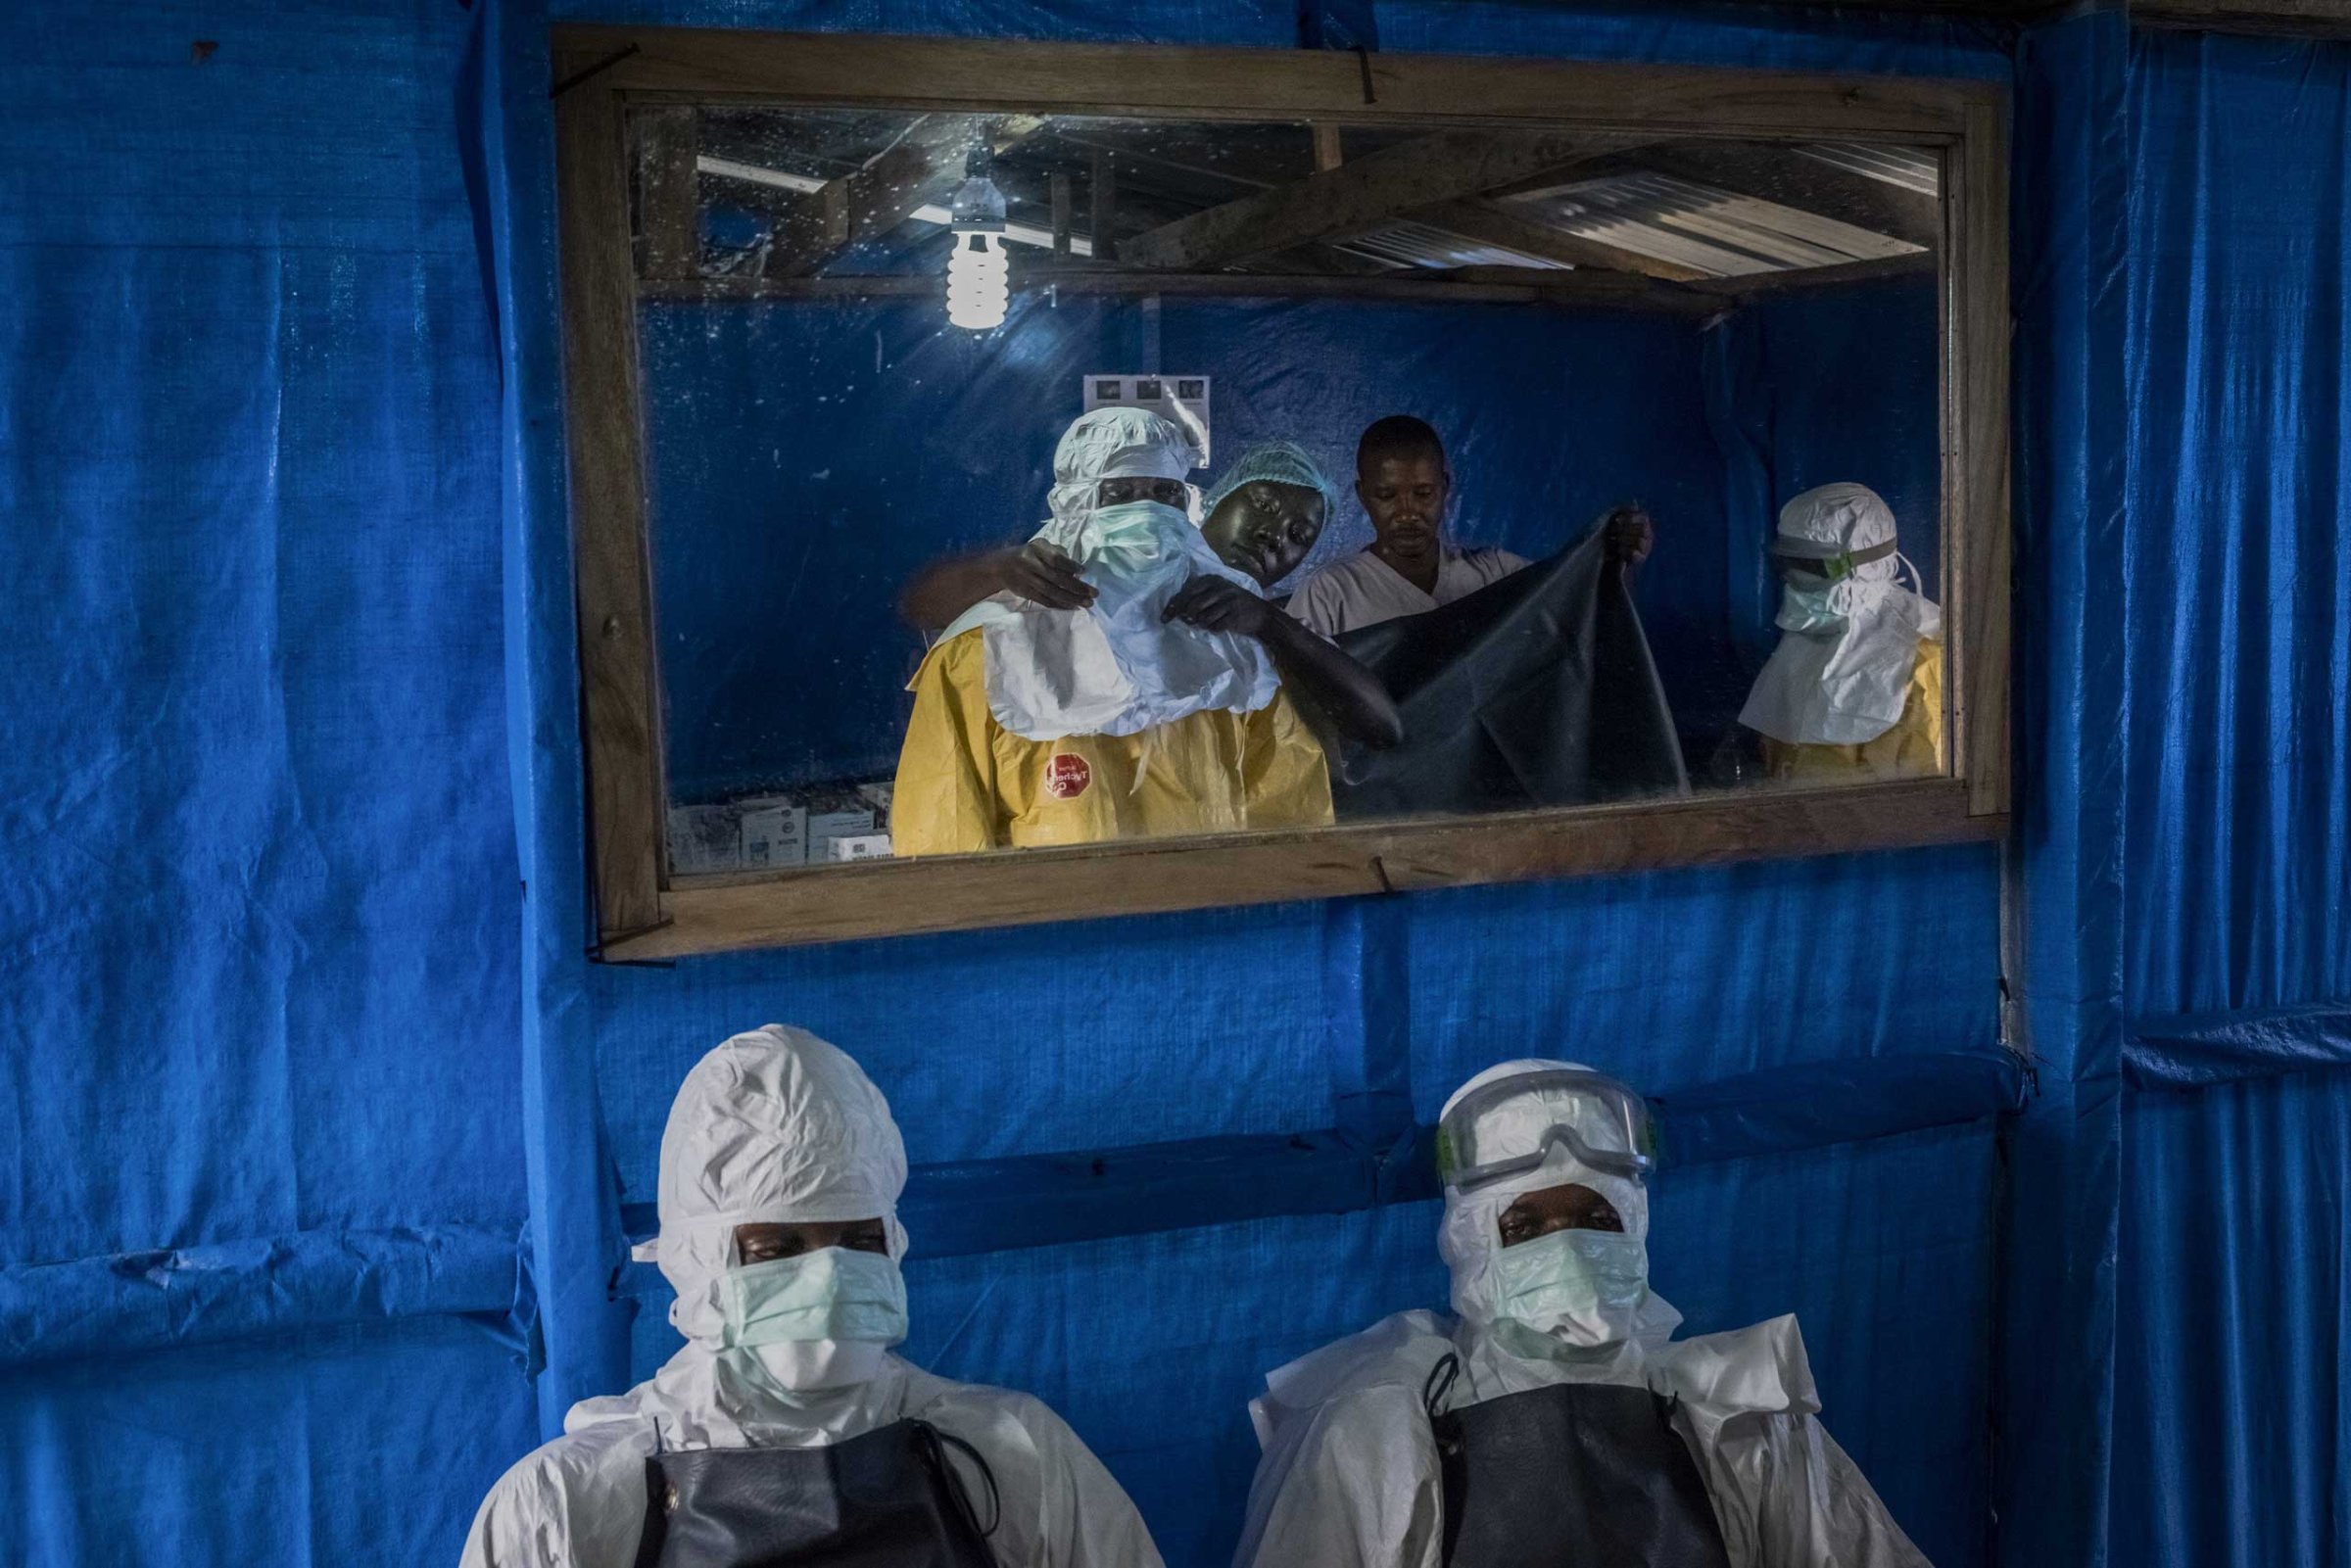 Health workers receive assistance with putting on their protective gear before entering the high-risk zone at the Bong County Ebola Treatment Unit near Gbarnga in rural Bong County, Liberia, Oct. 5, 2014.